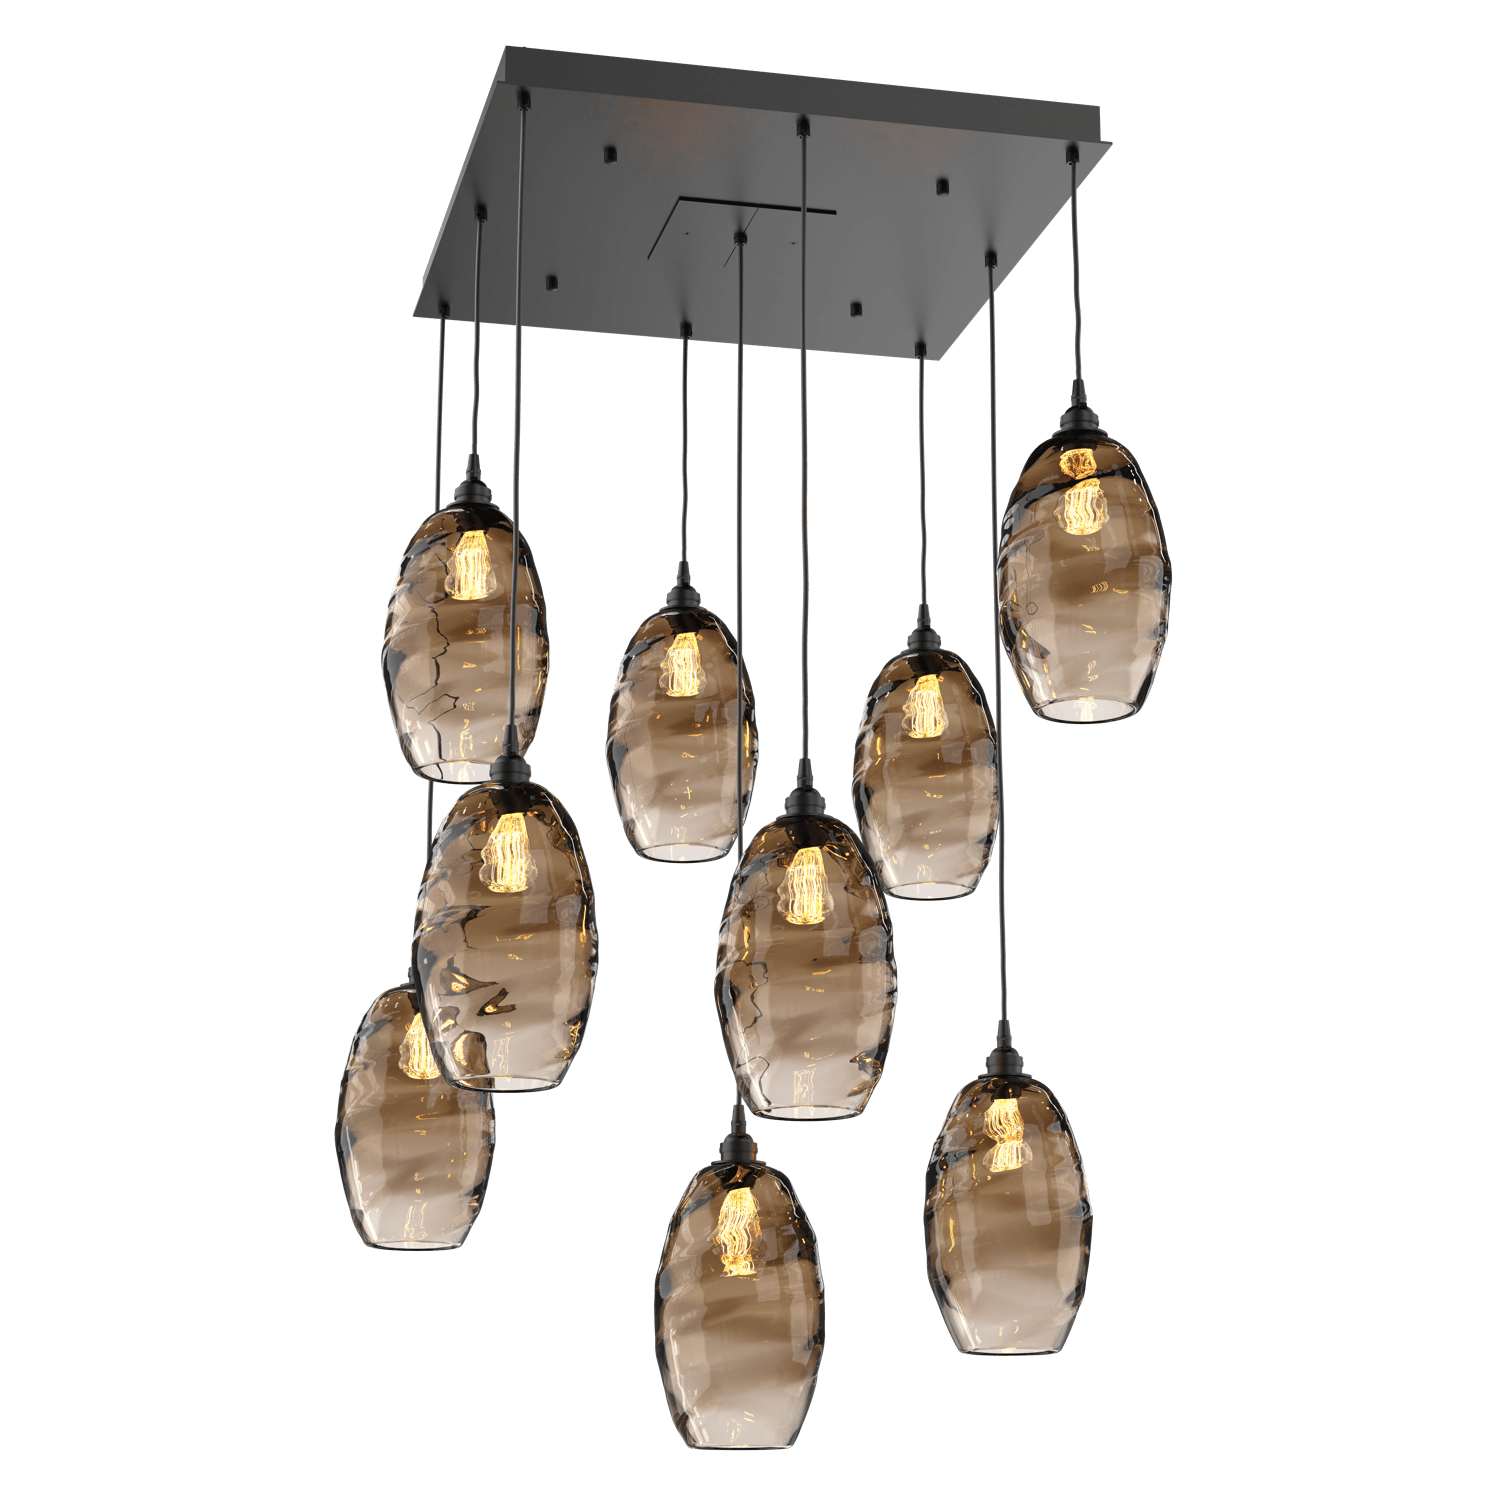 CHB0035-09-MB-OB-Hammerton-Studio-Optic-Blown-Glass-Elisse-9-light-square-pendant-chandelier-with-matte-black-finish-and-optic-bronze-blown-glass-shades-and-incandescent-lamping